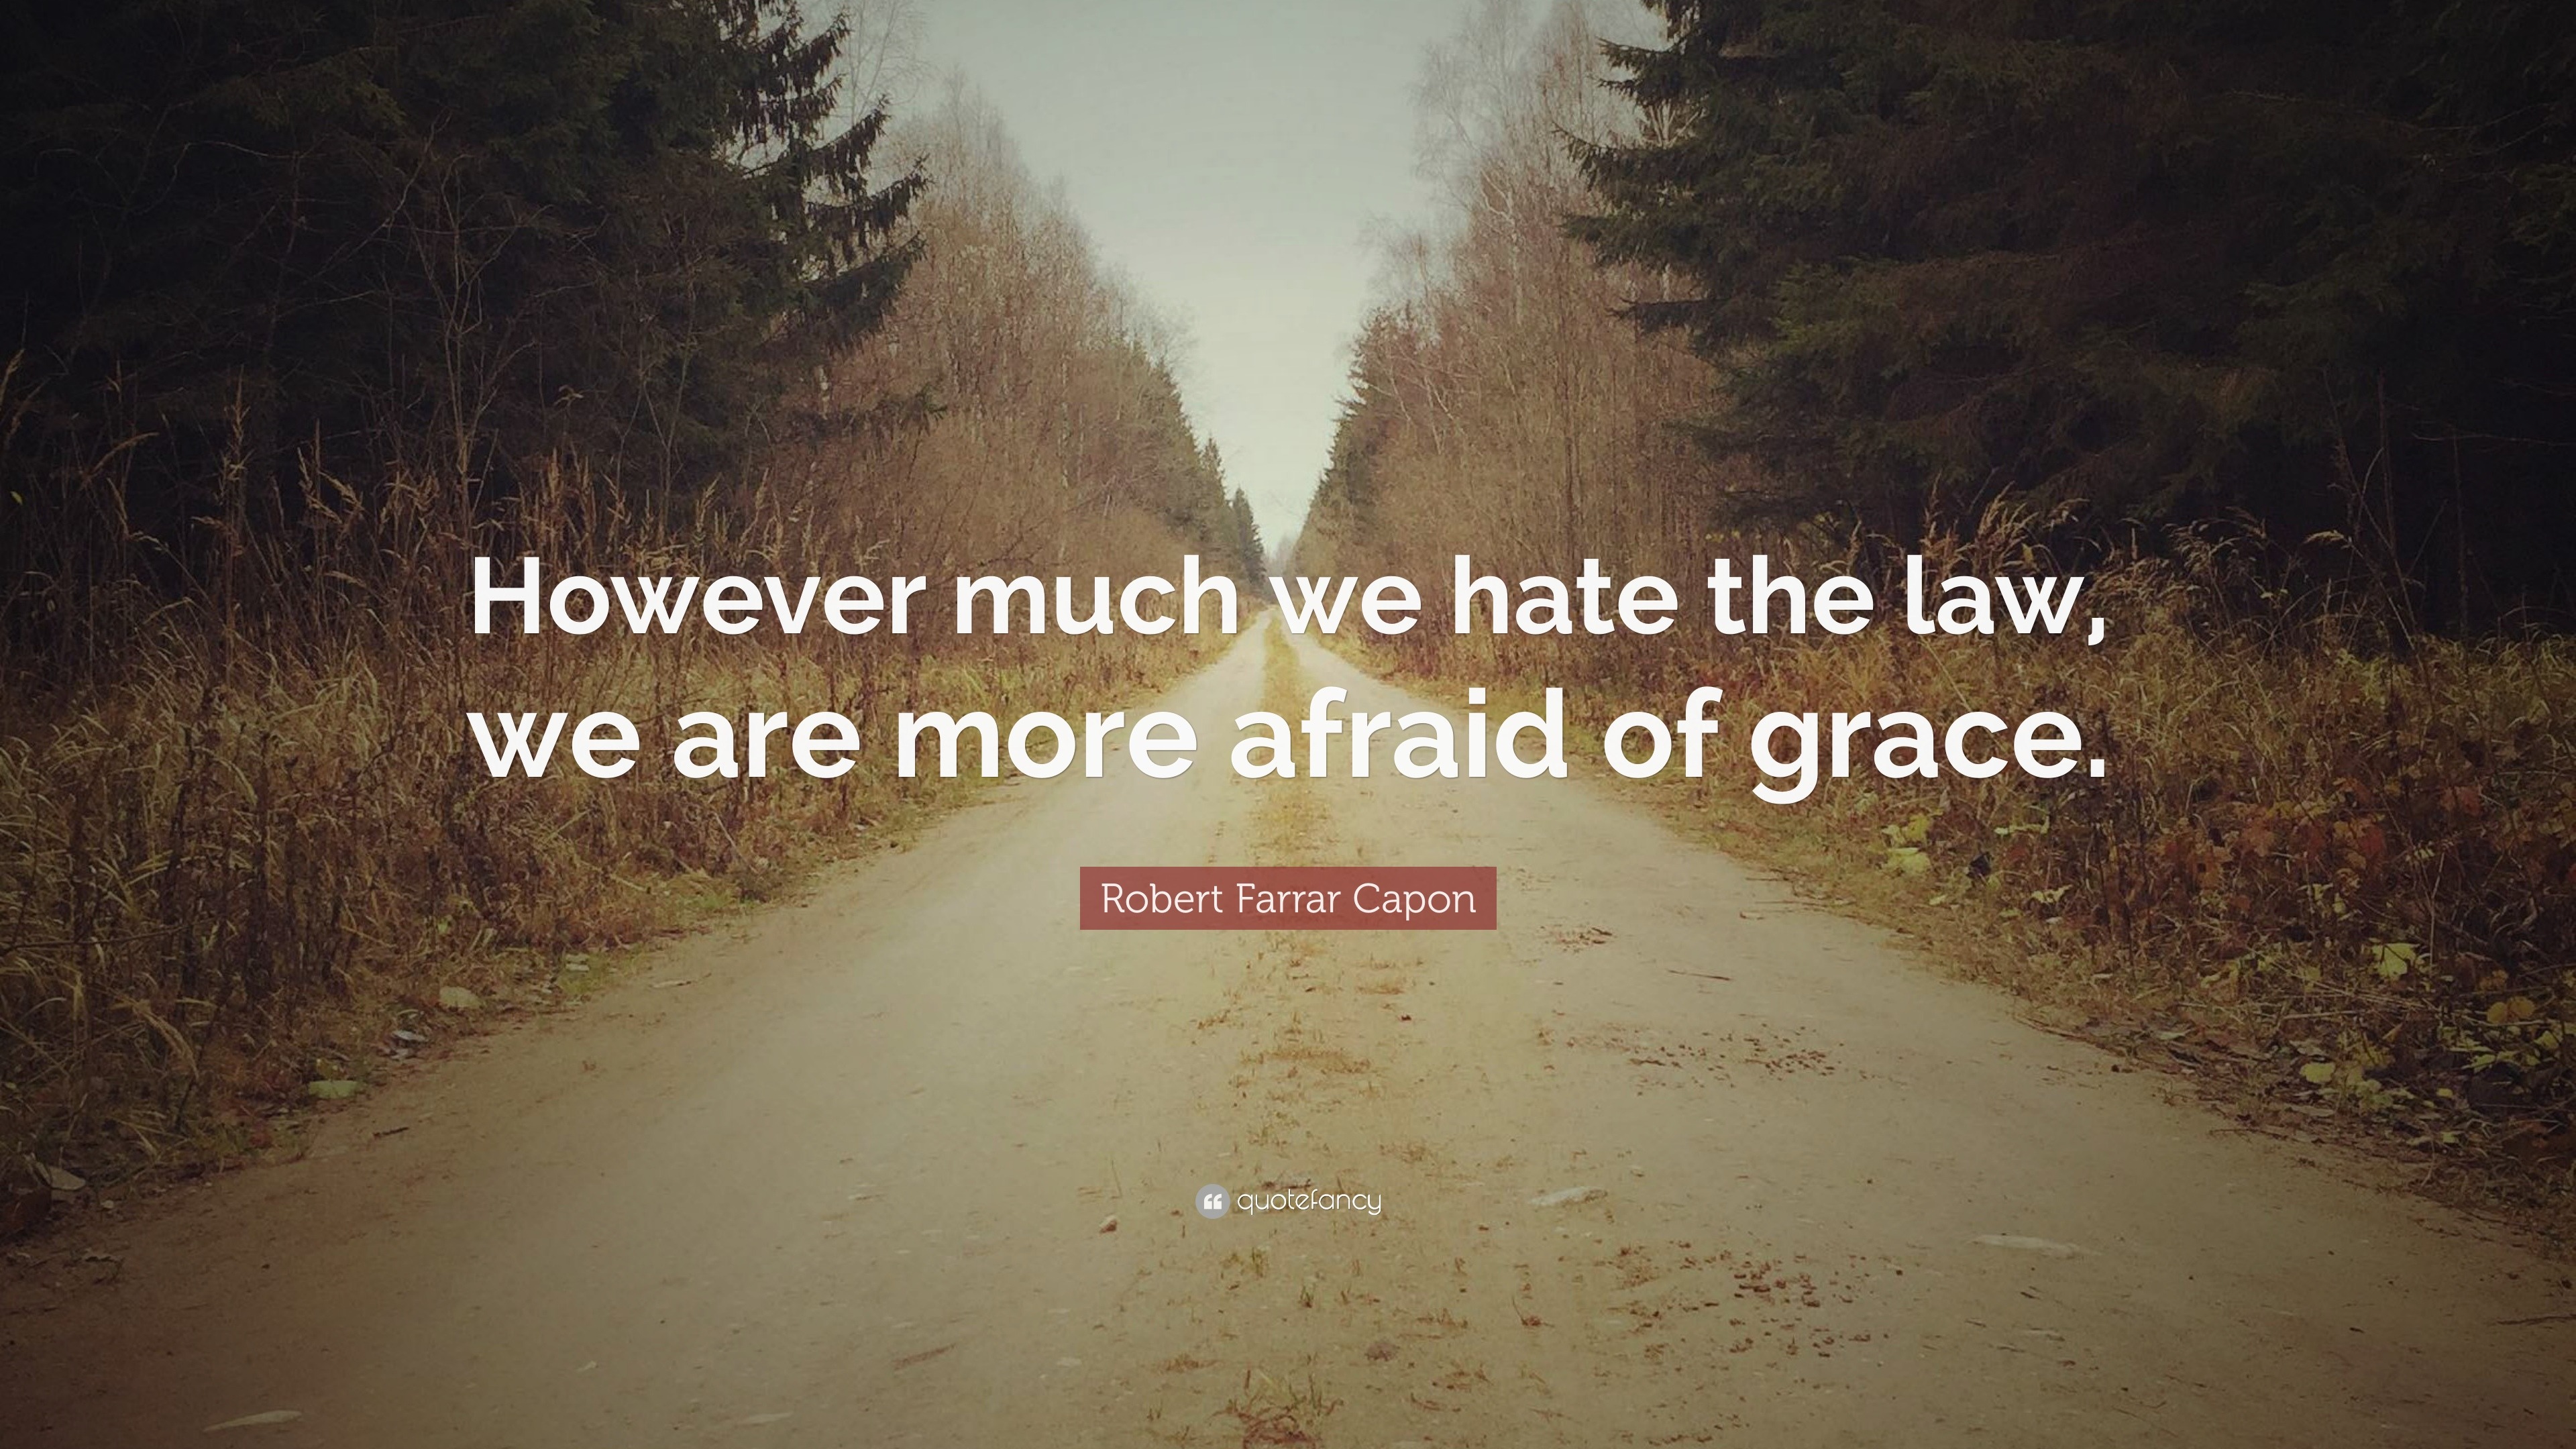 870013-Robert-Farrar-Capon-Quote-However-much-we-hate-the-law-we-are-more.jpg